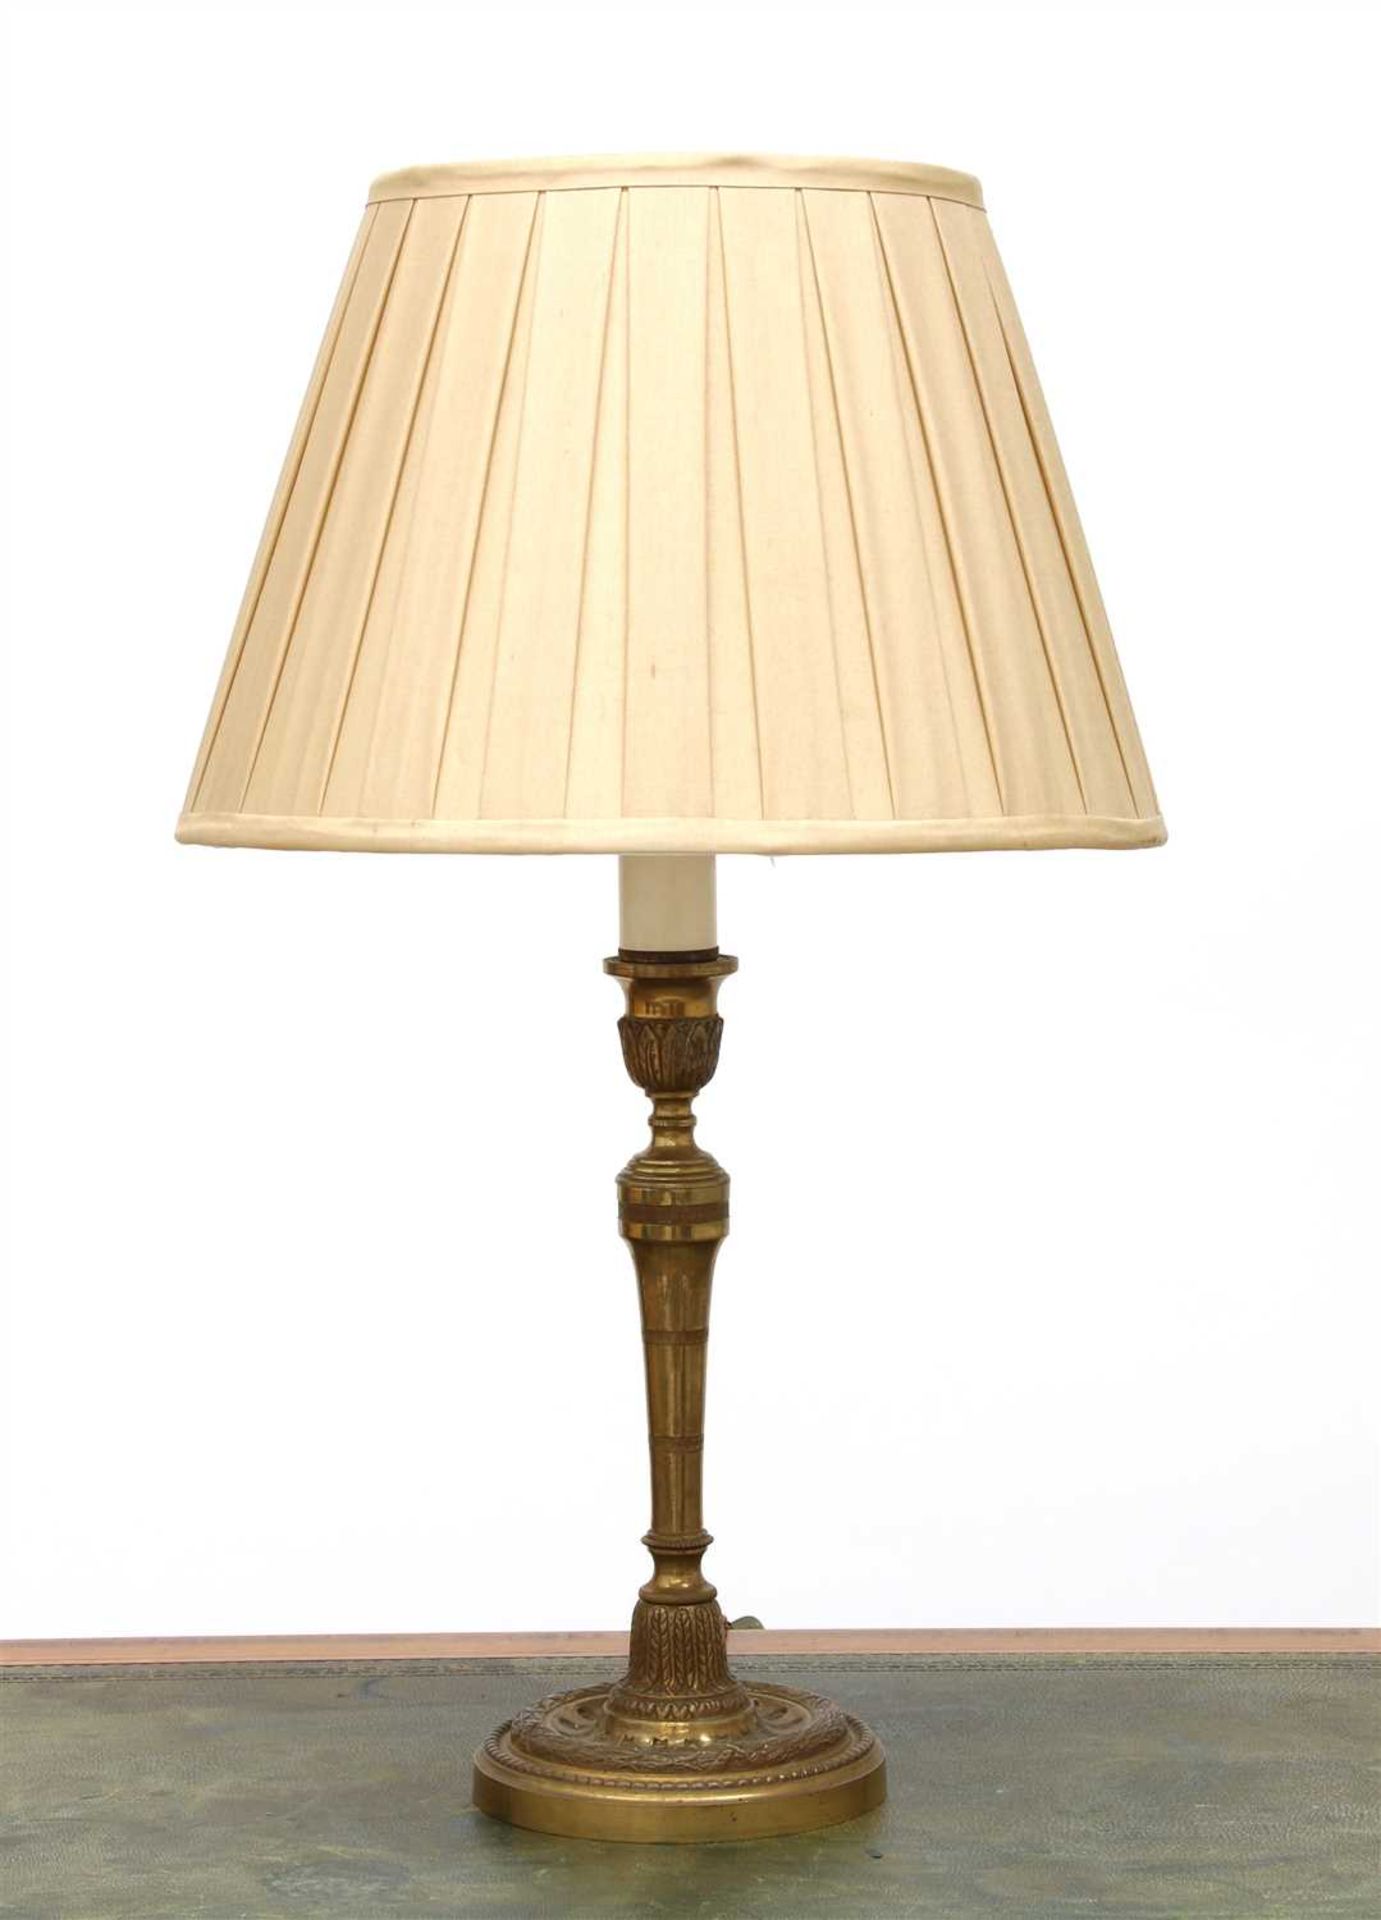 A brass candlestick table lamp,